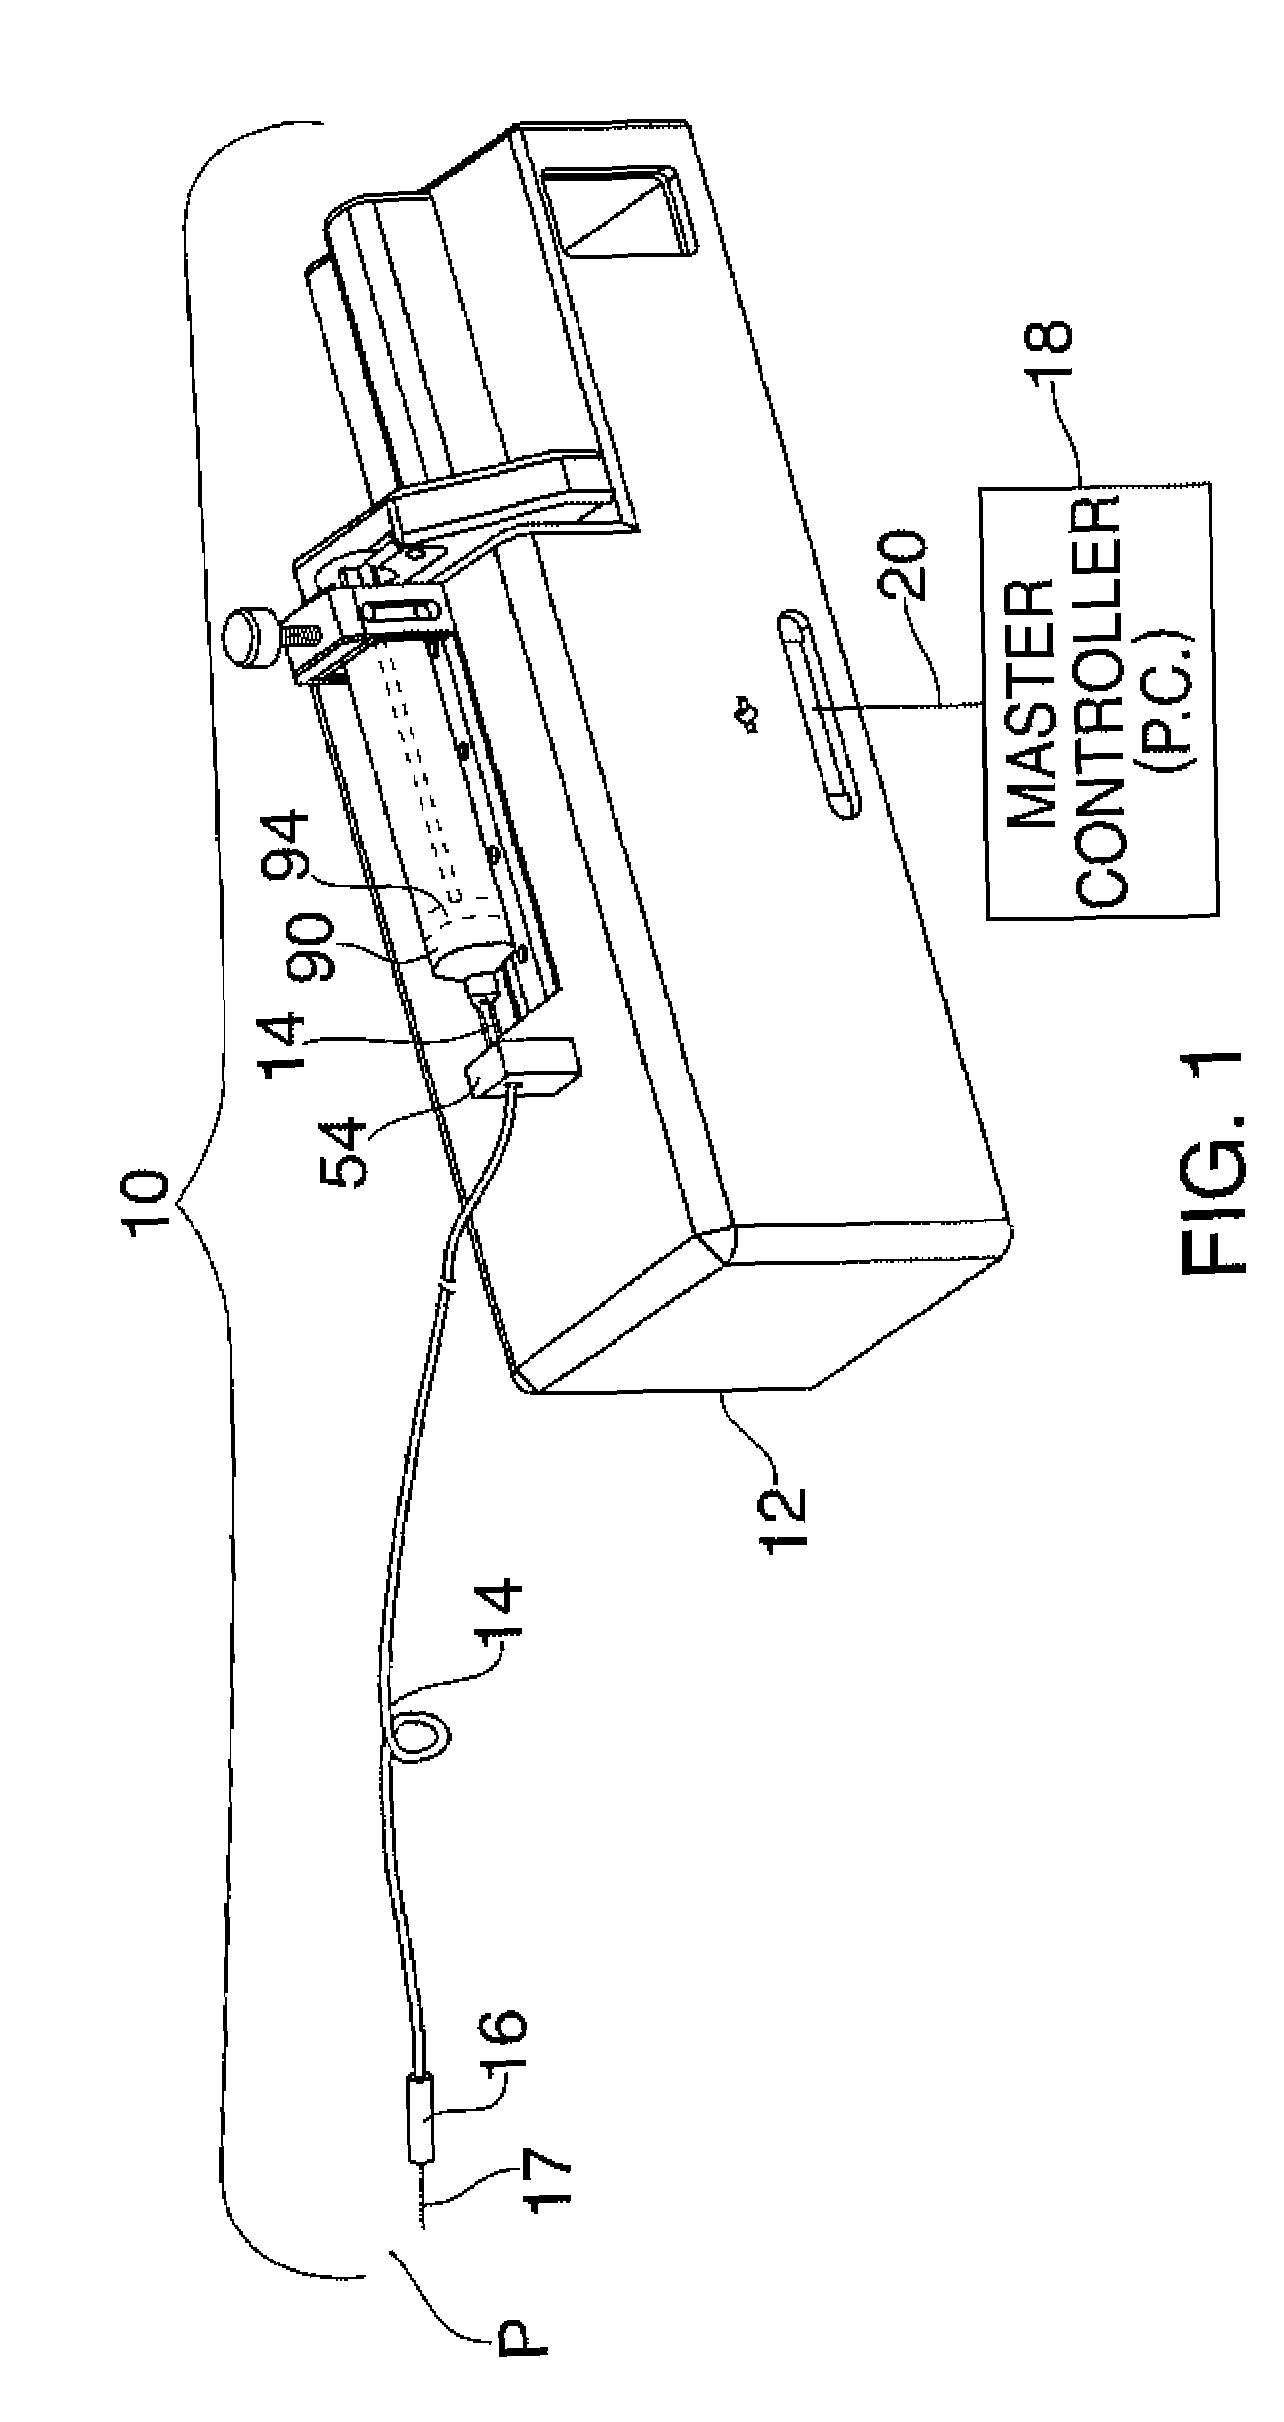 Drug infusion device with tissue identification using pressure sensing